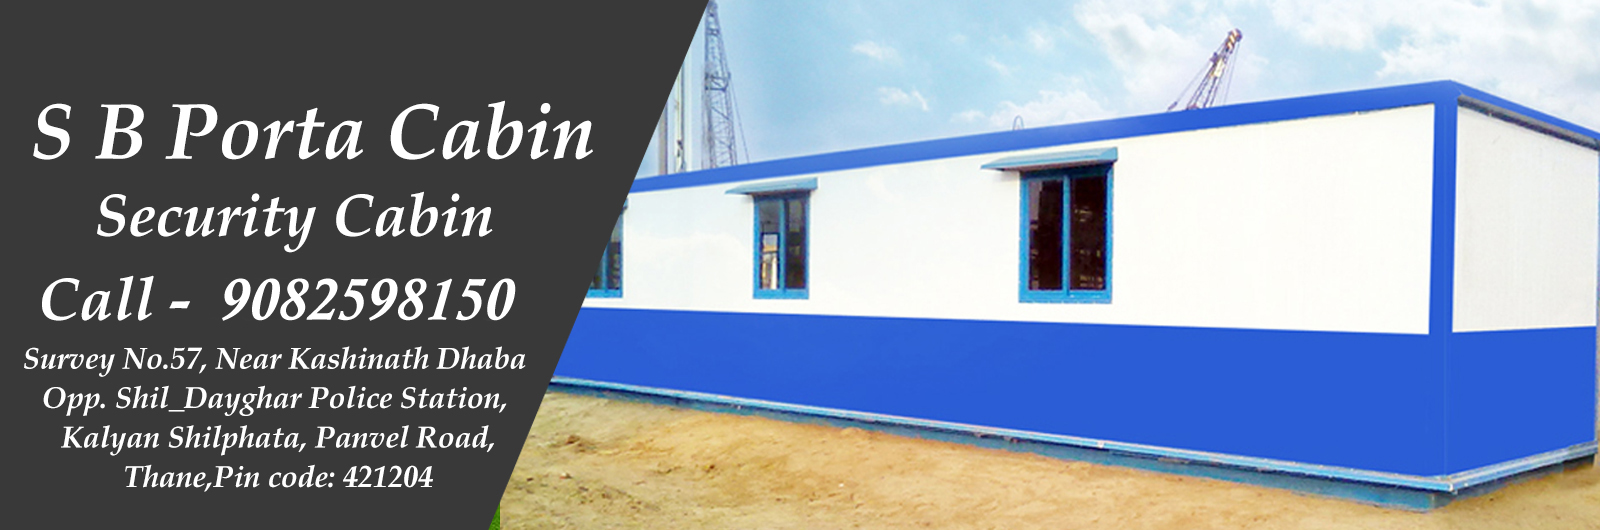 Portable Cabin Manufacturer in India